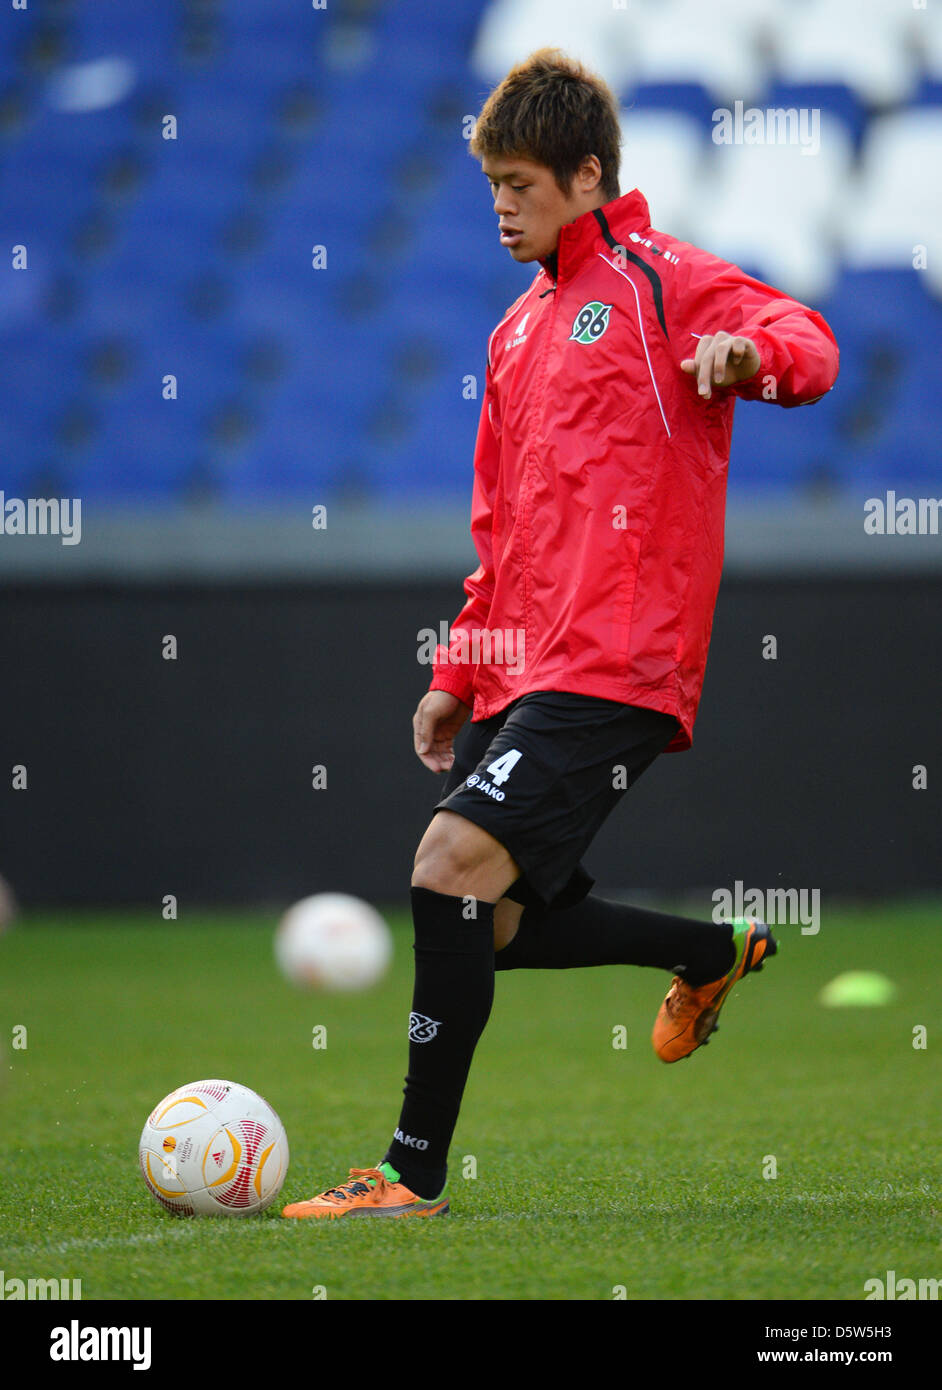 Hanover's Hiroki Sakai takes part in the final training before the Europa League group L match against Spainish club UD Levante at AWD Arena in Hanover, Germany, 03 October 2012. Hannover 96 will play UD Levante on 04 October 2012. Photo: PETER STEFFEN Stock Photo